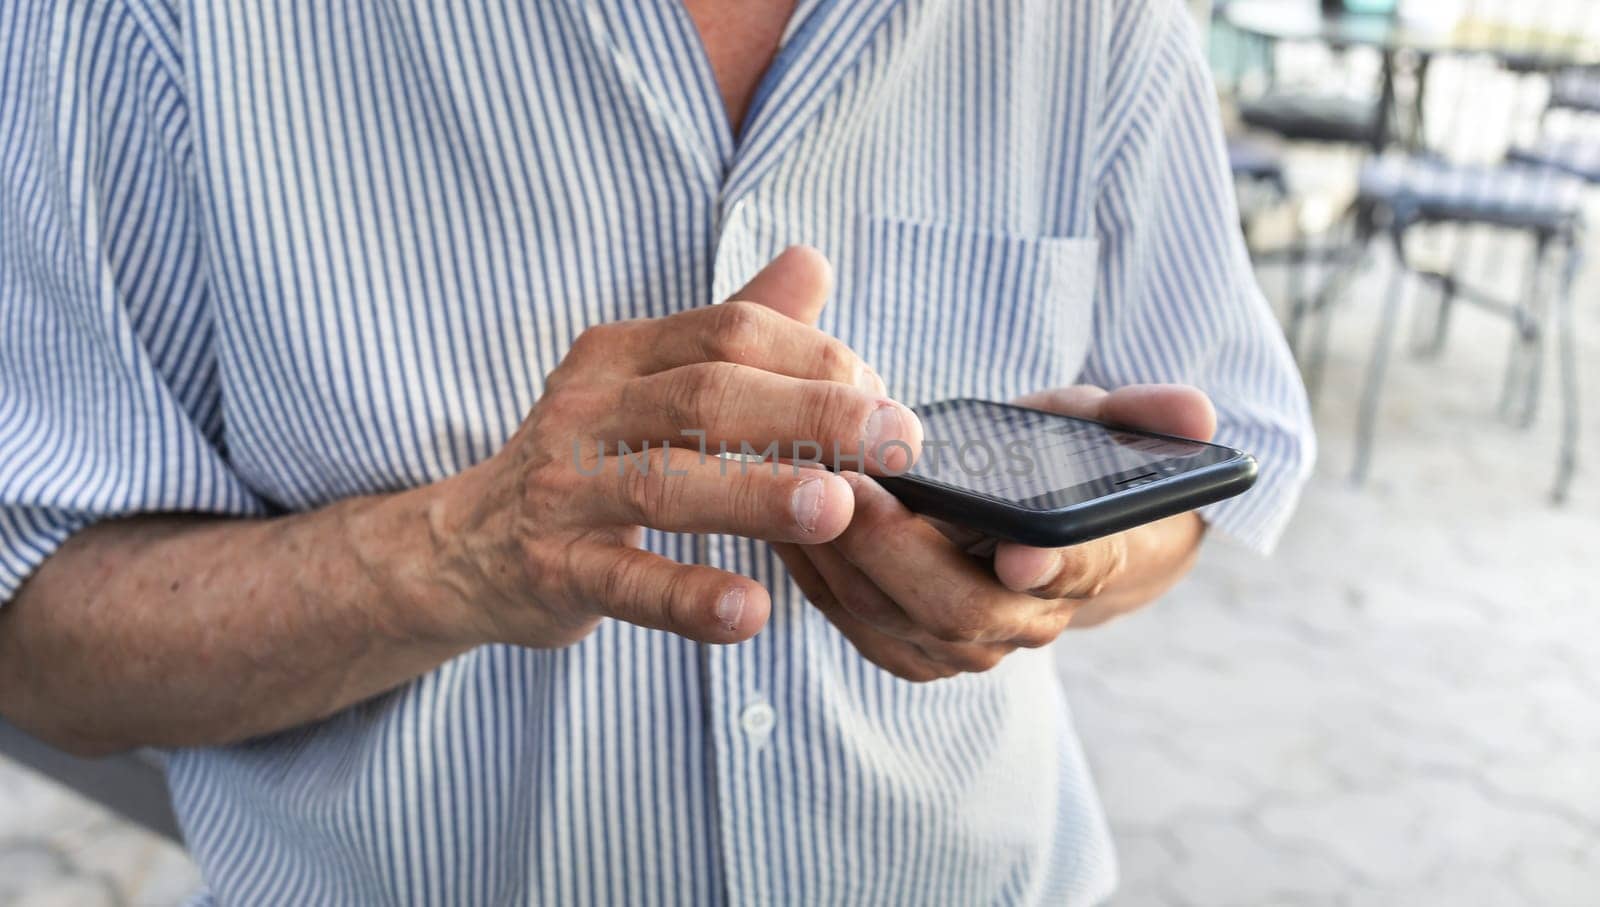 An elderly man holds a mobile phone in his hands with nibbled nails. Close-up image of an elderly man's hands